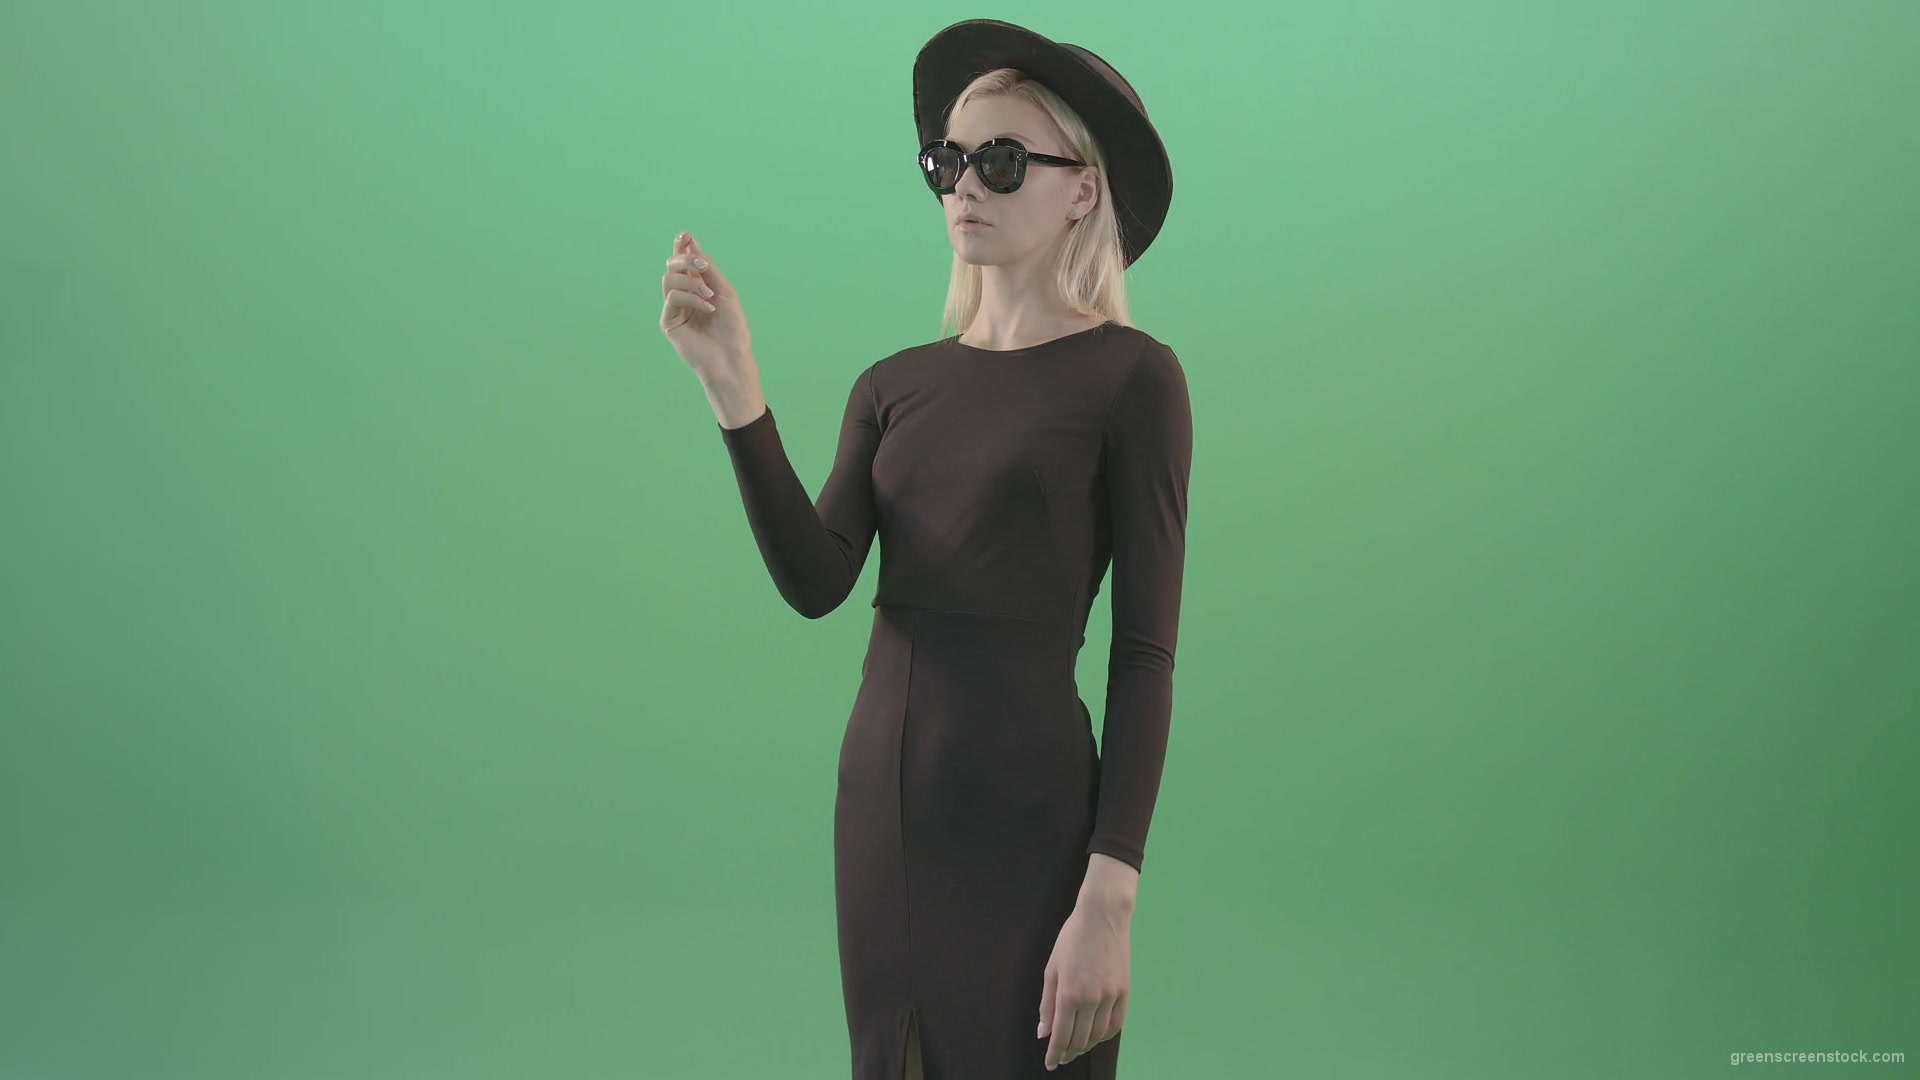 Awesome-beautiful-luxury-women-in-black-dress-shopping-virtual-products-on-touch-screen-4K-Green-Screen-Video-Footage-1920_005 Green Screen Stock